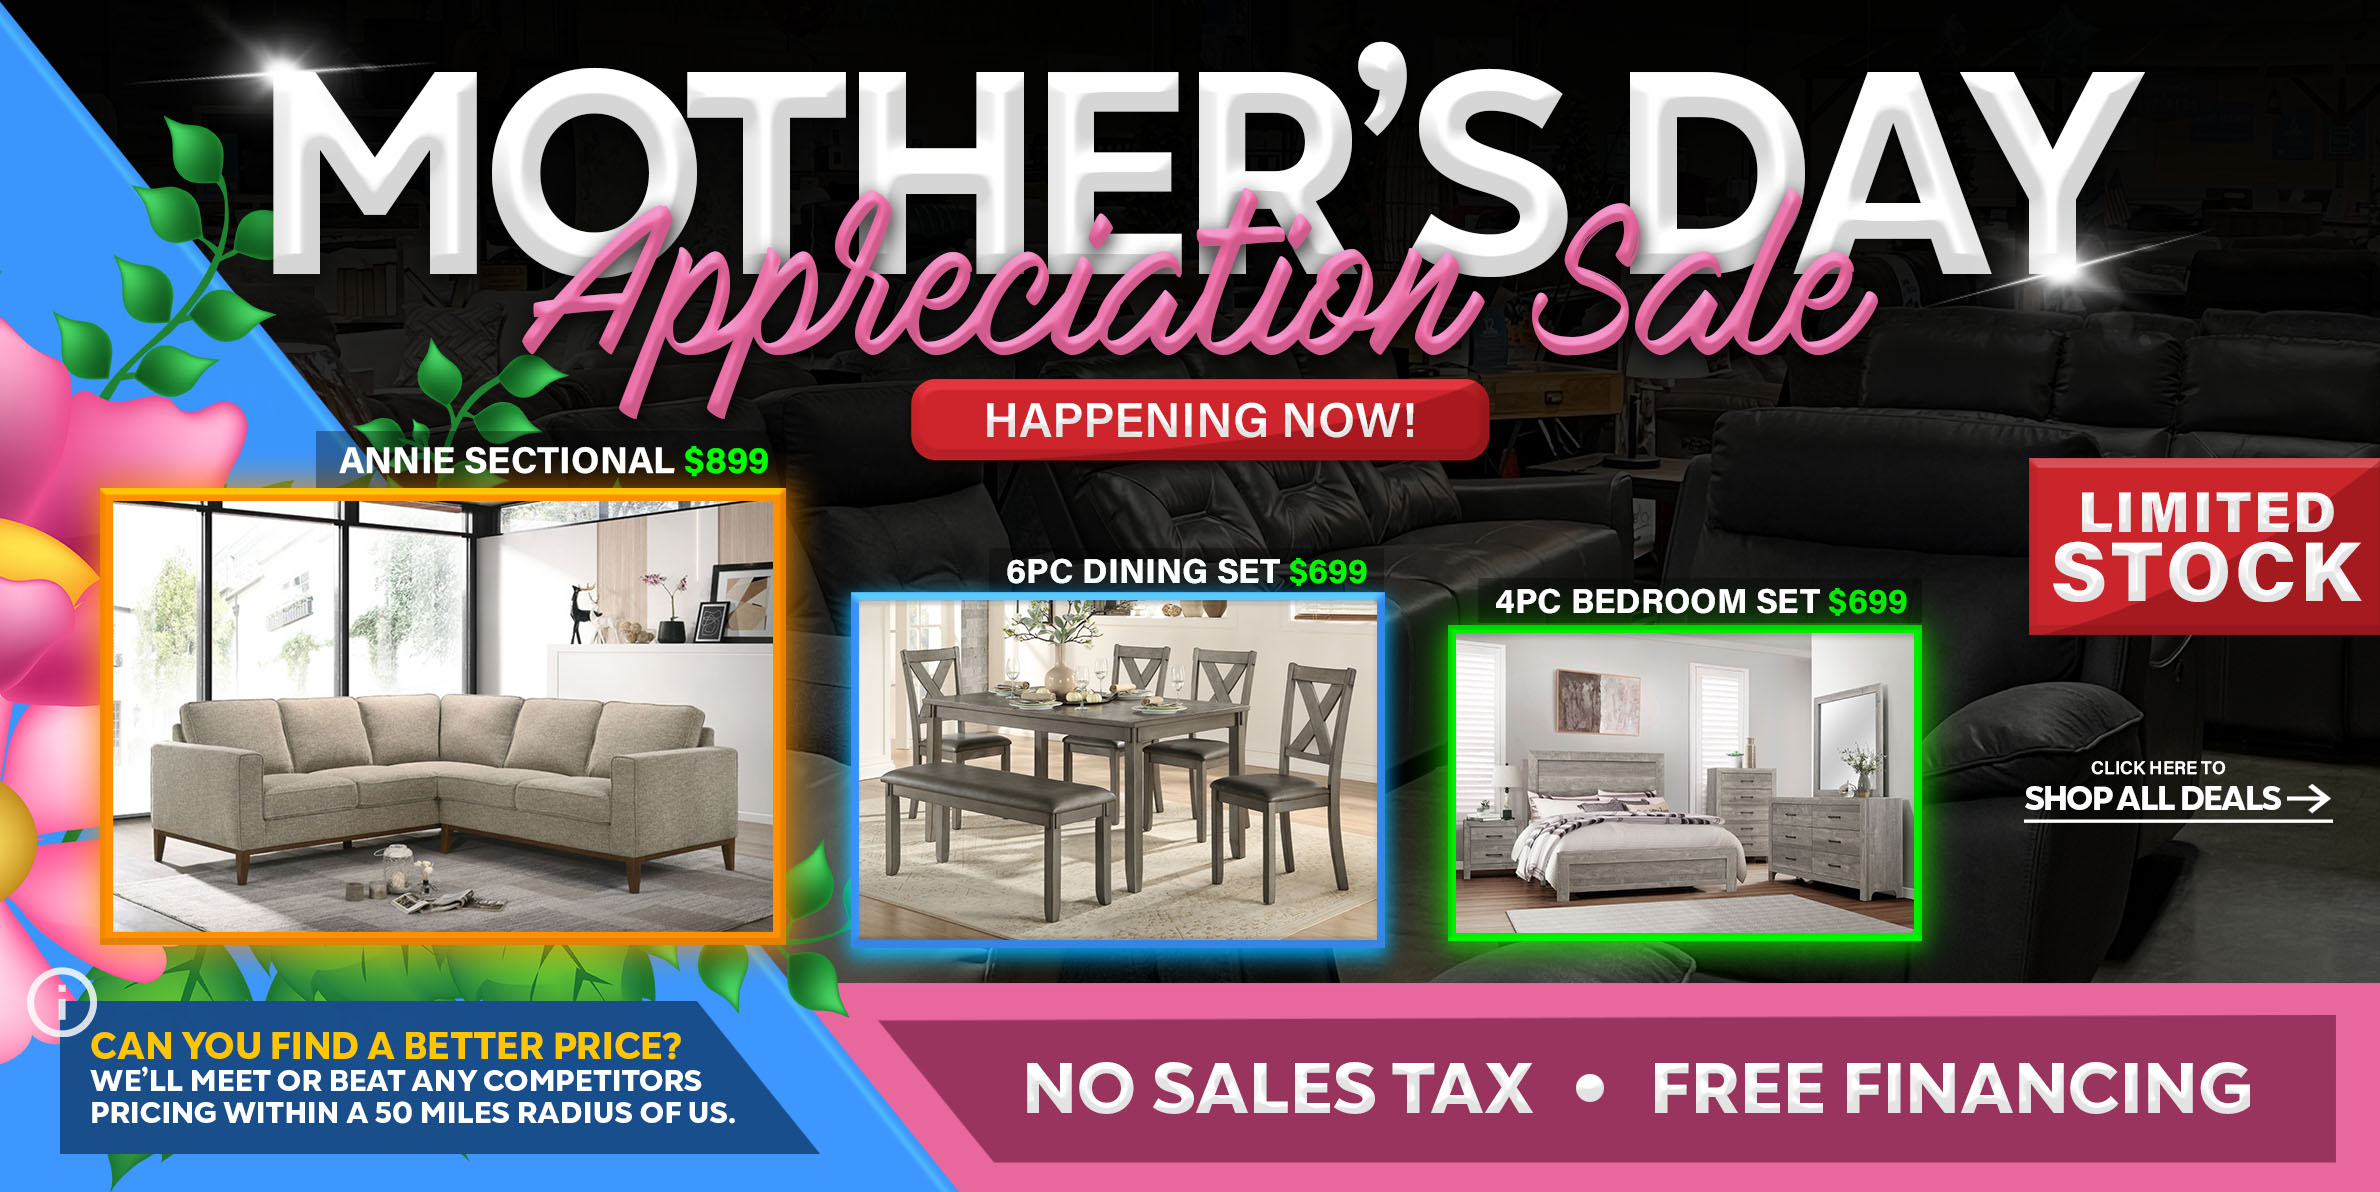 Mothers Day Discount Furniture Sale at The Furniture Shack Store located in Portland, OR.